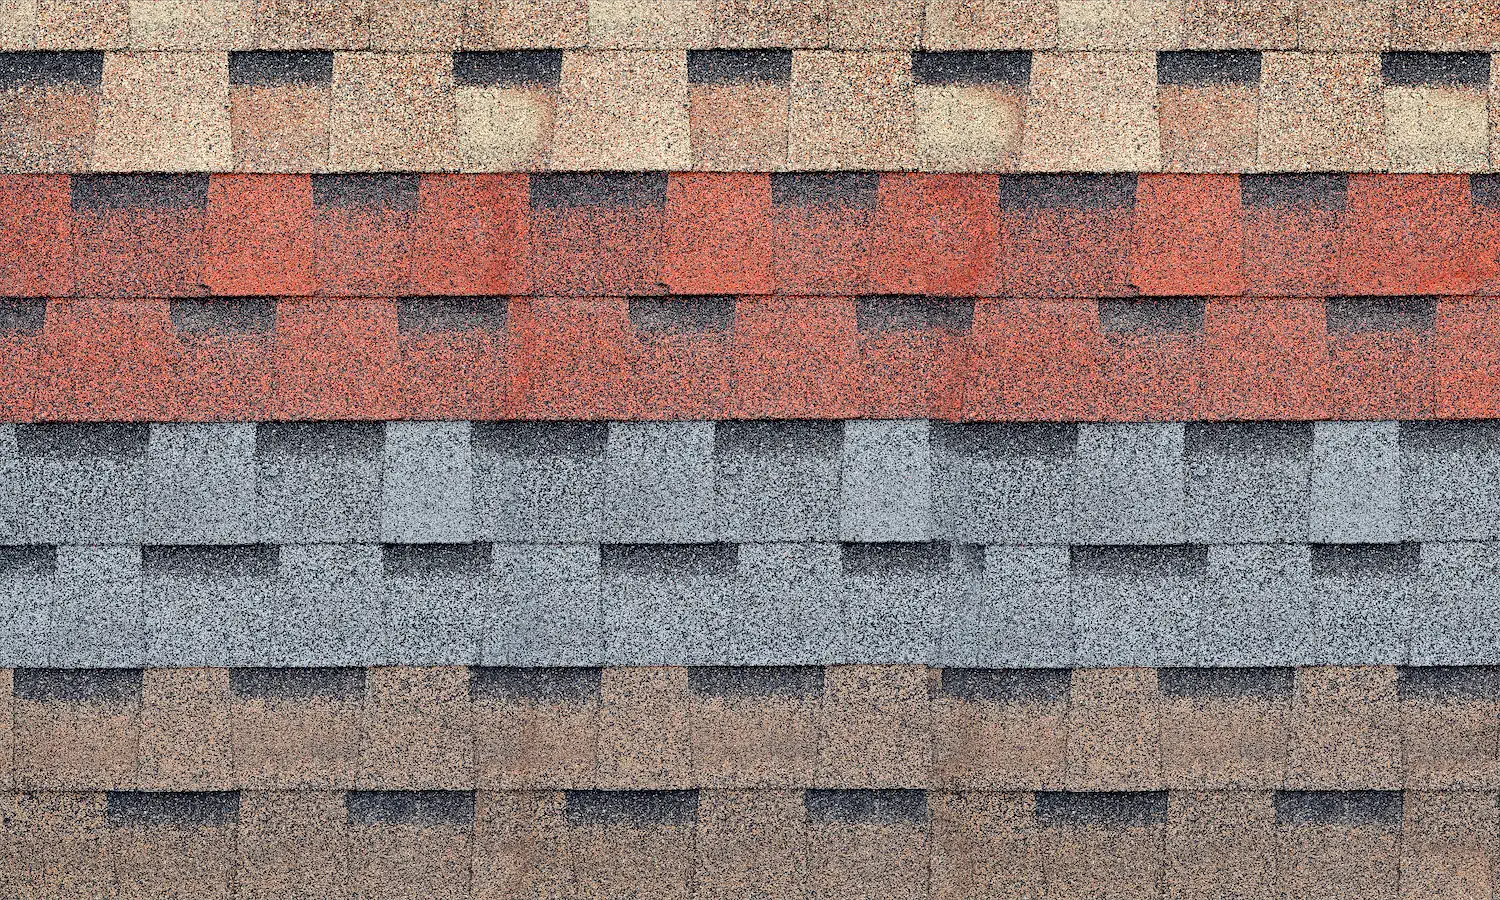 Choosing Roof Shingles By Color & Type